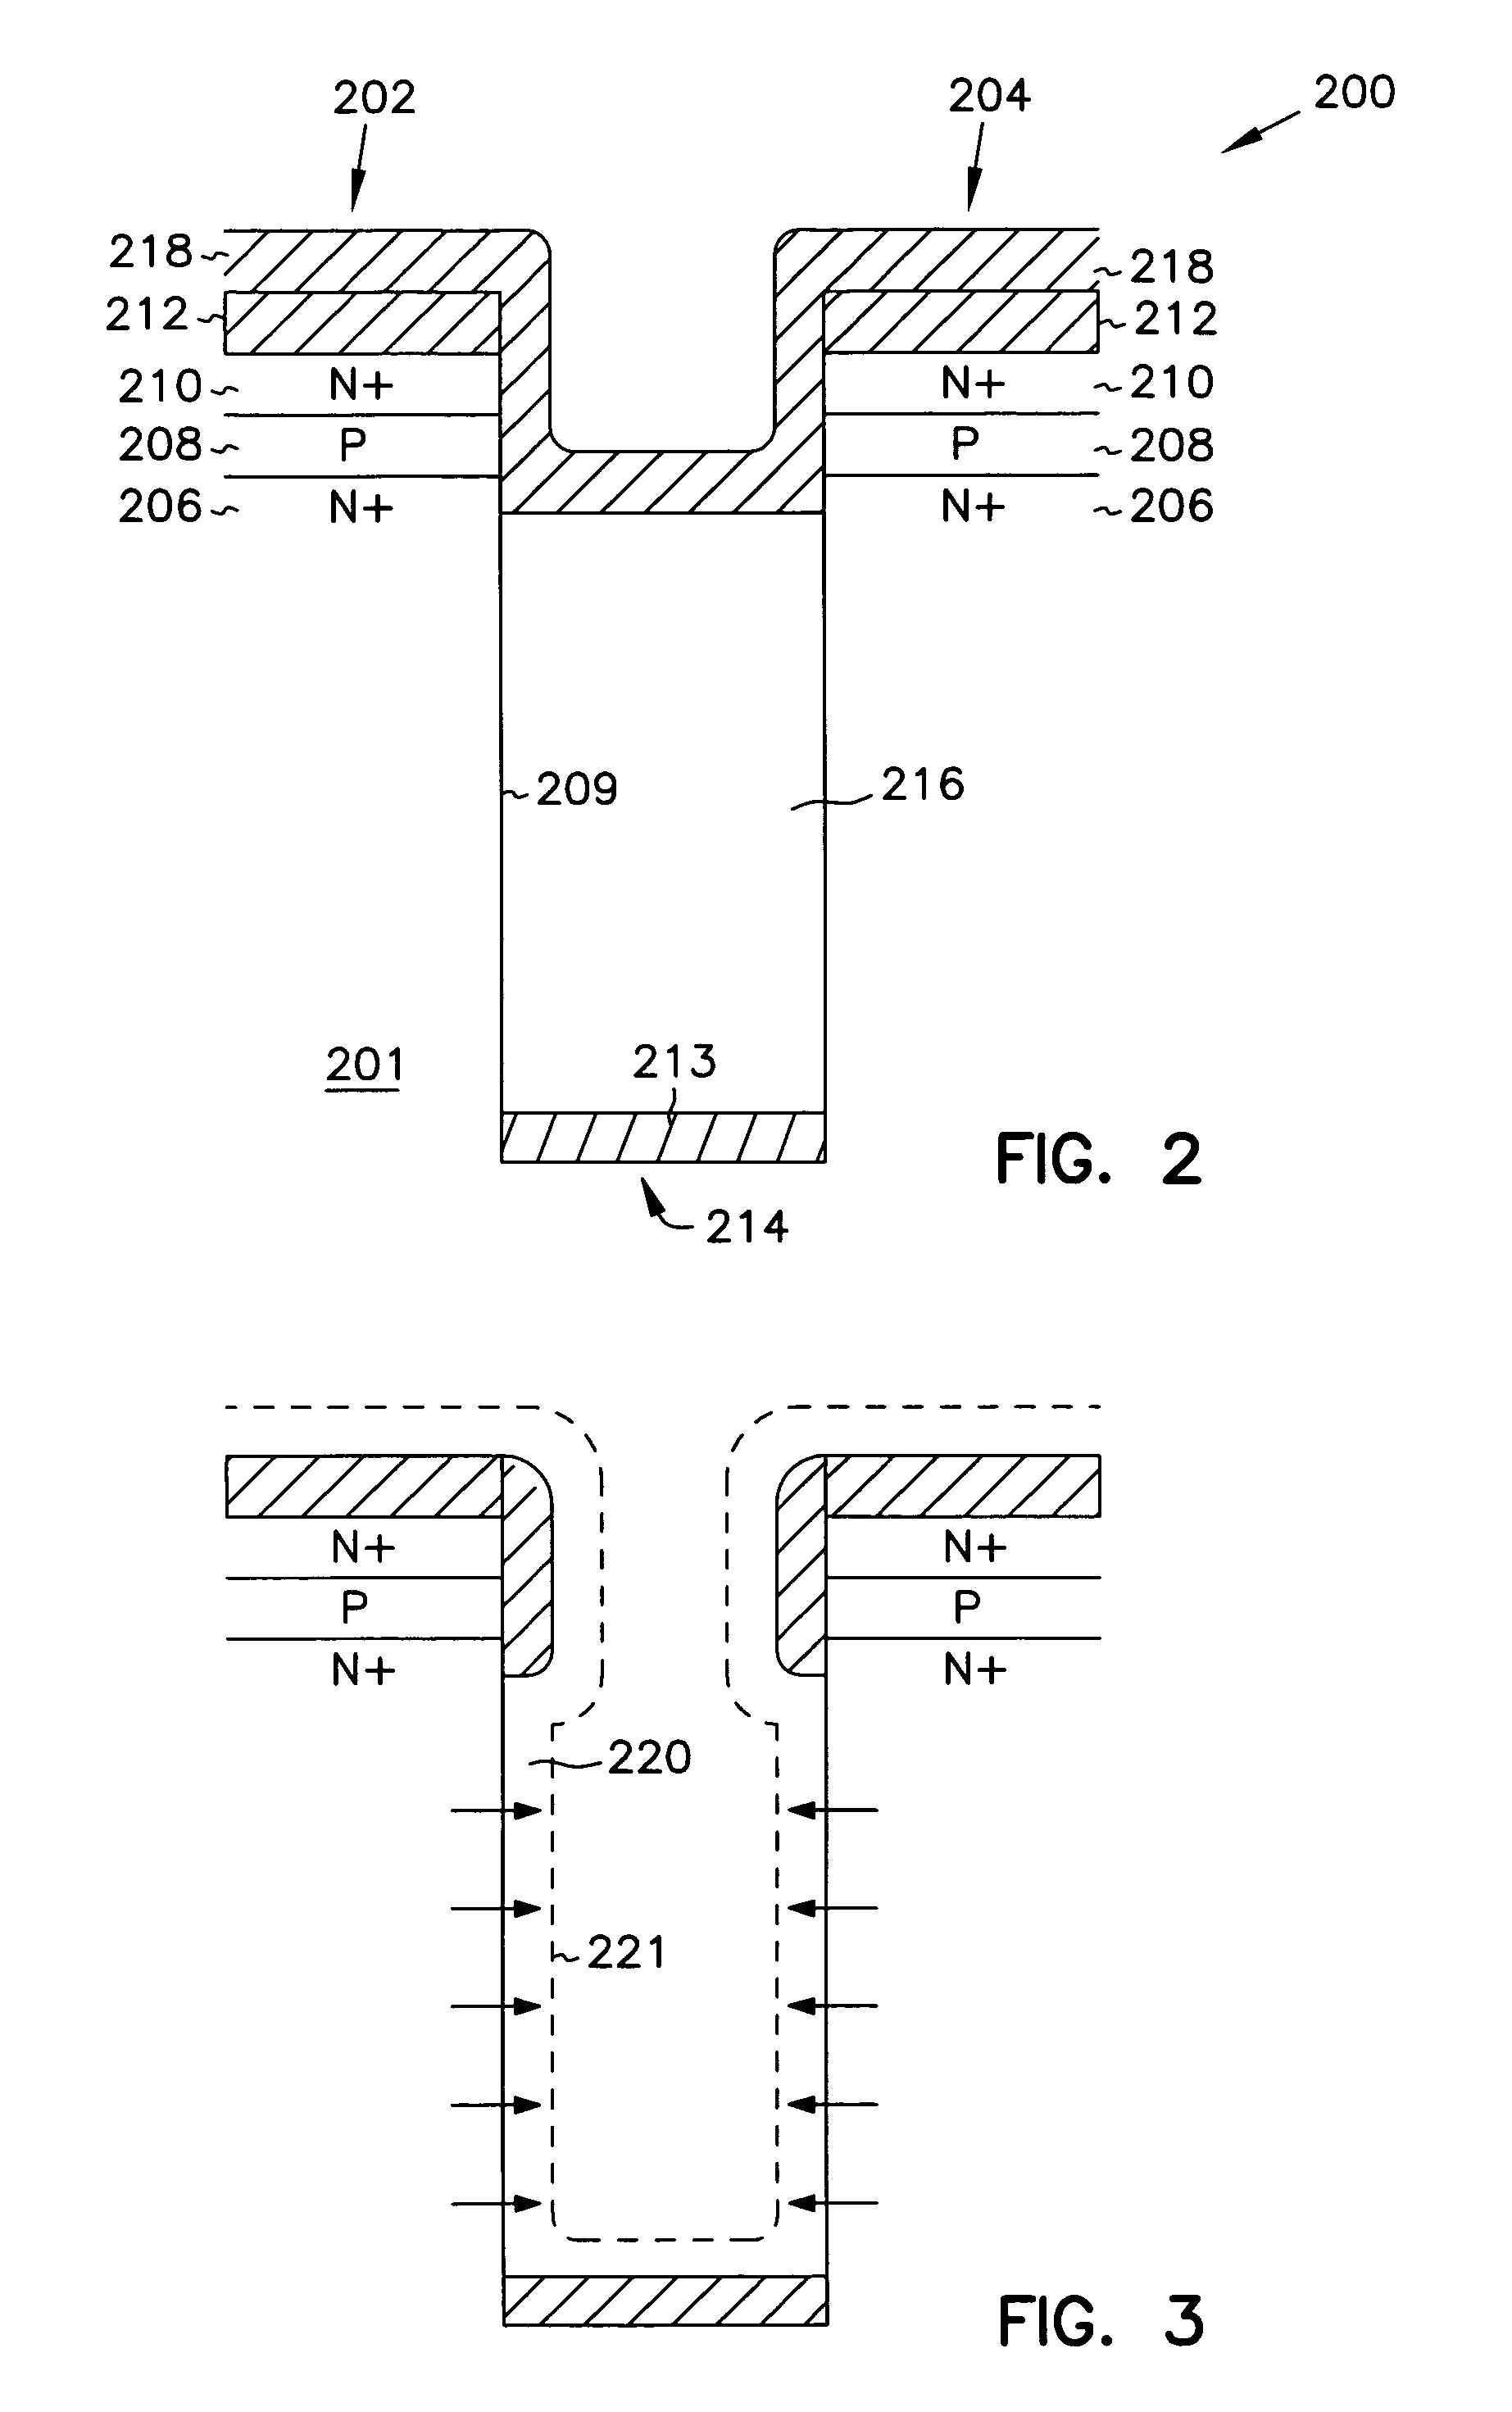 Circuits with a trench capacitor having micro-roughened semiconductor surfaces